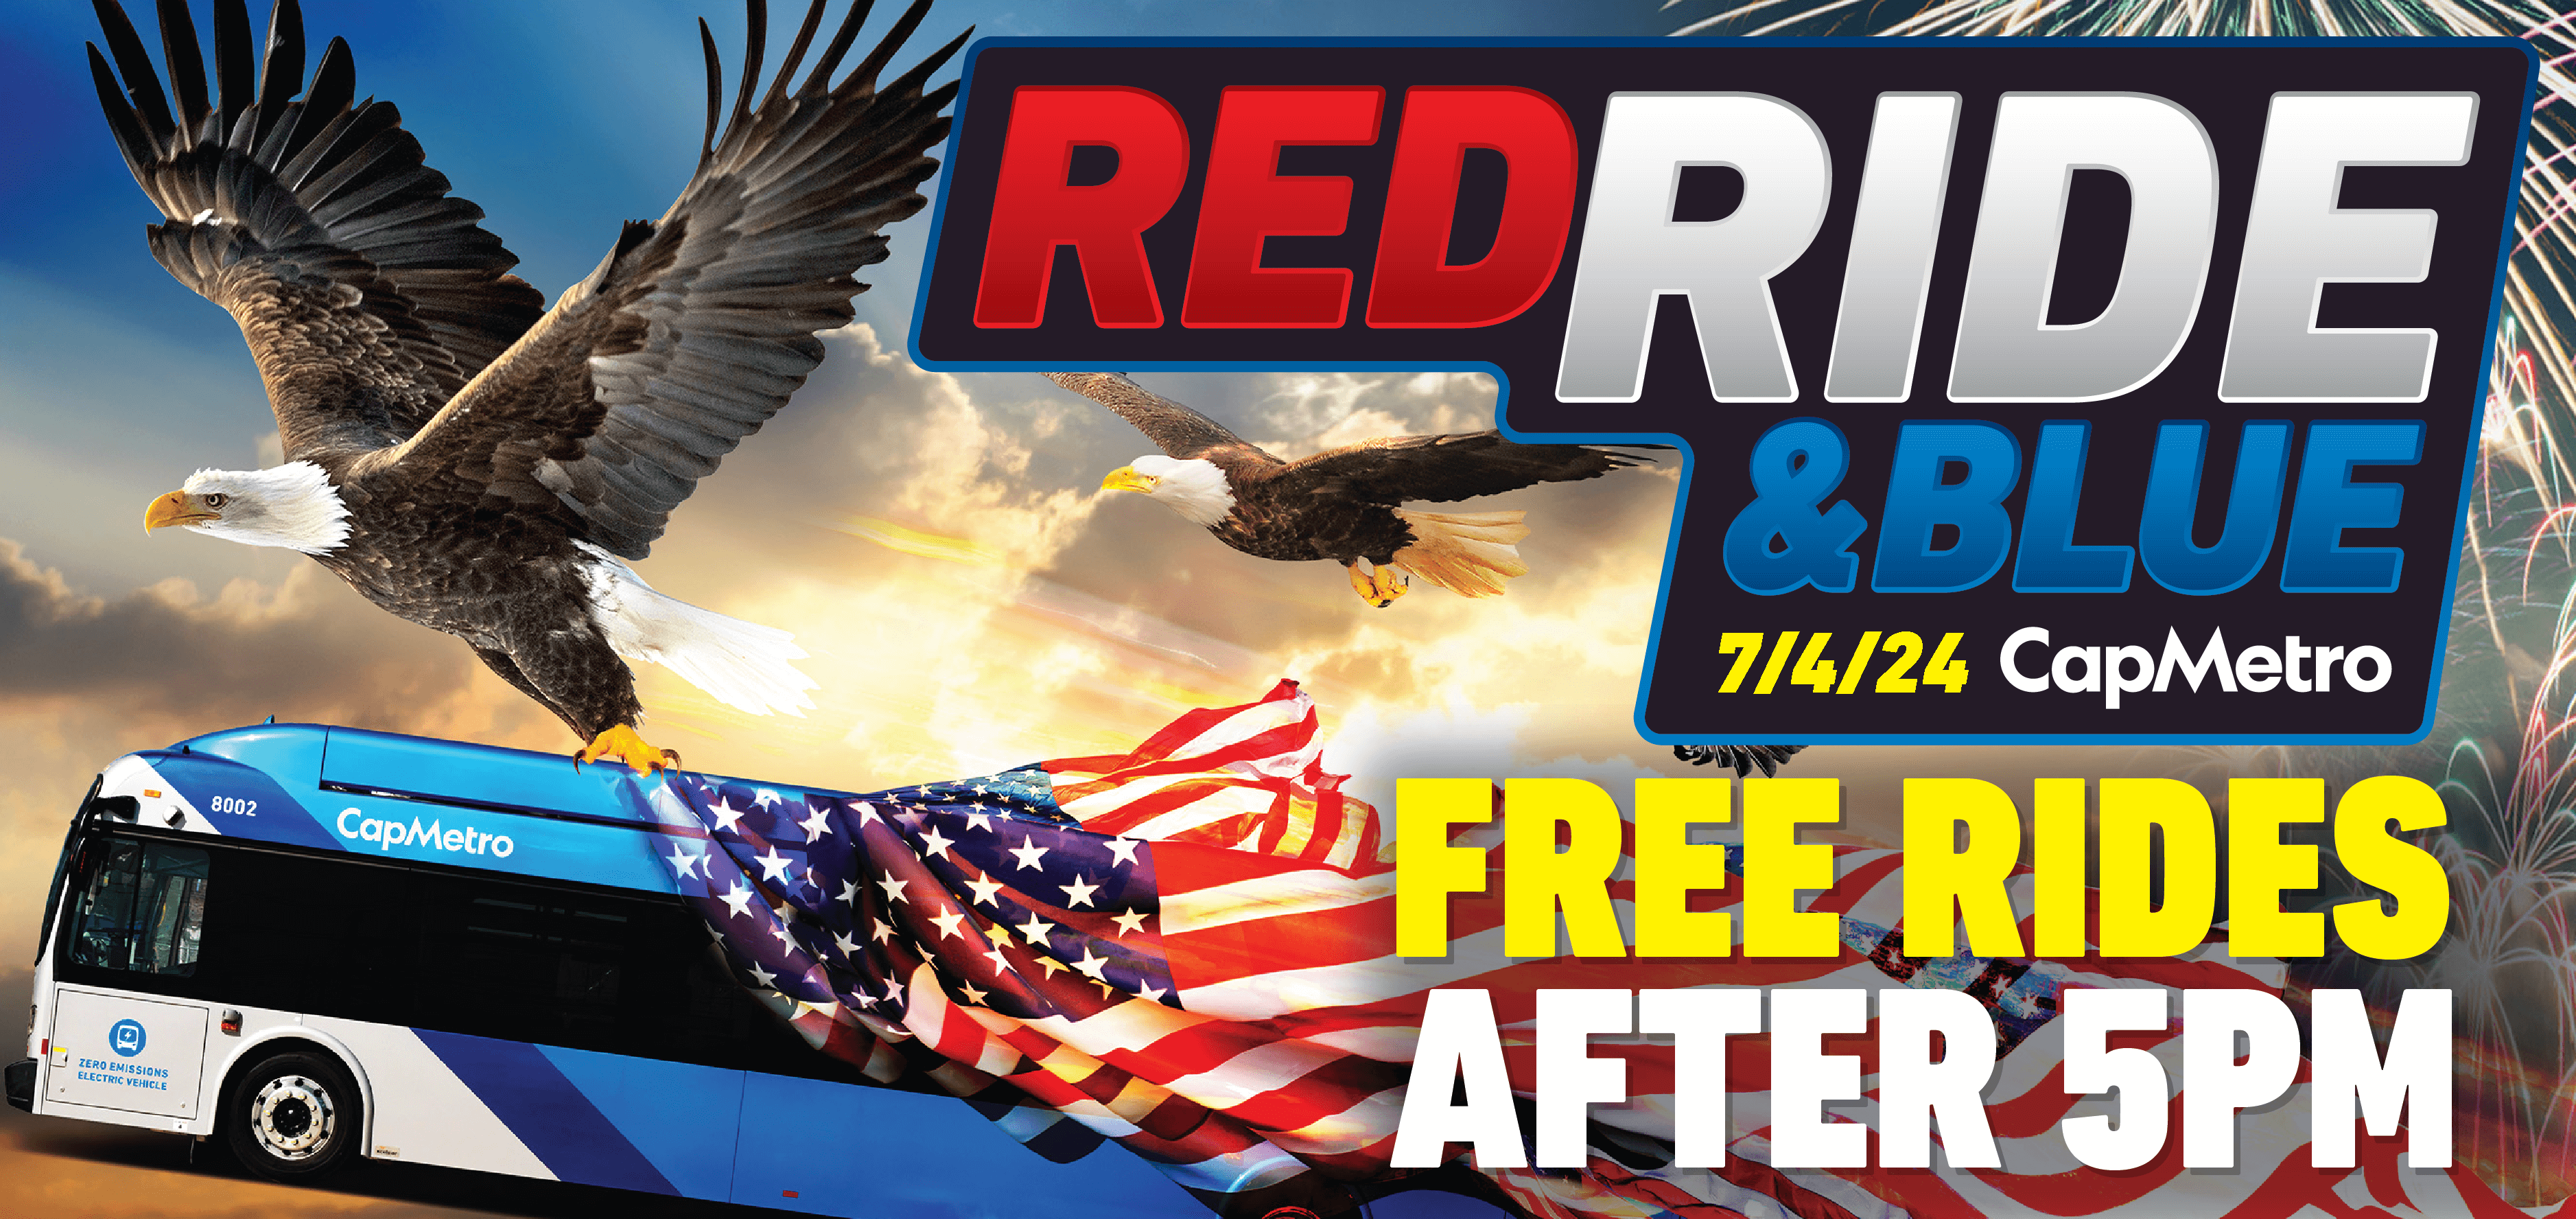 Red Ride and Blue, free rides after 5pm on July 4